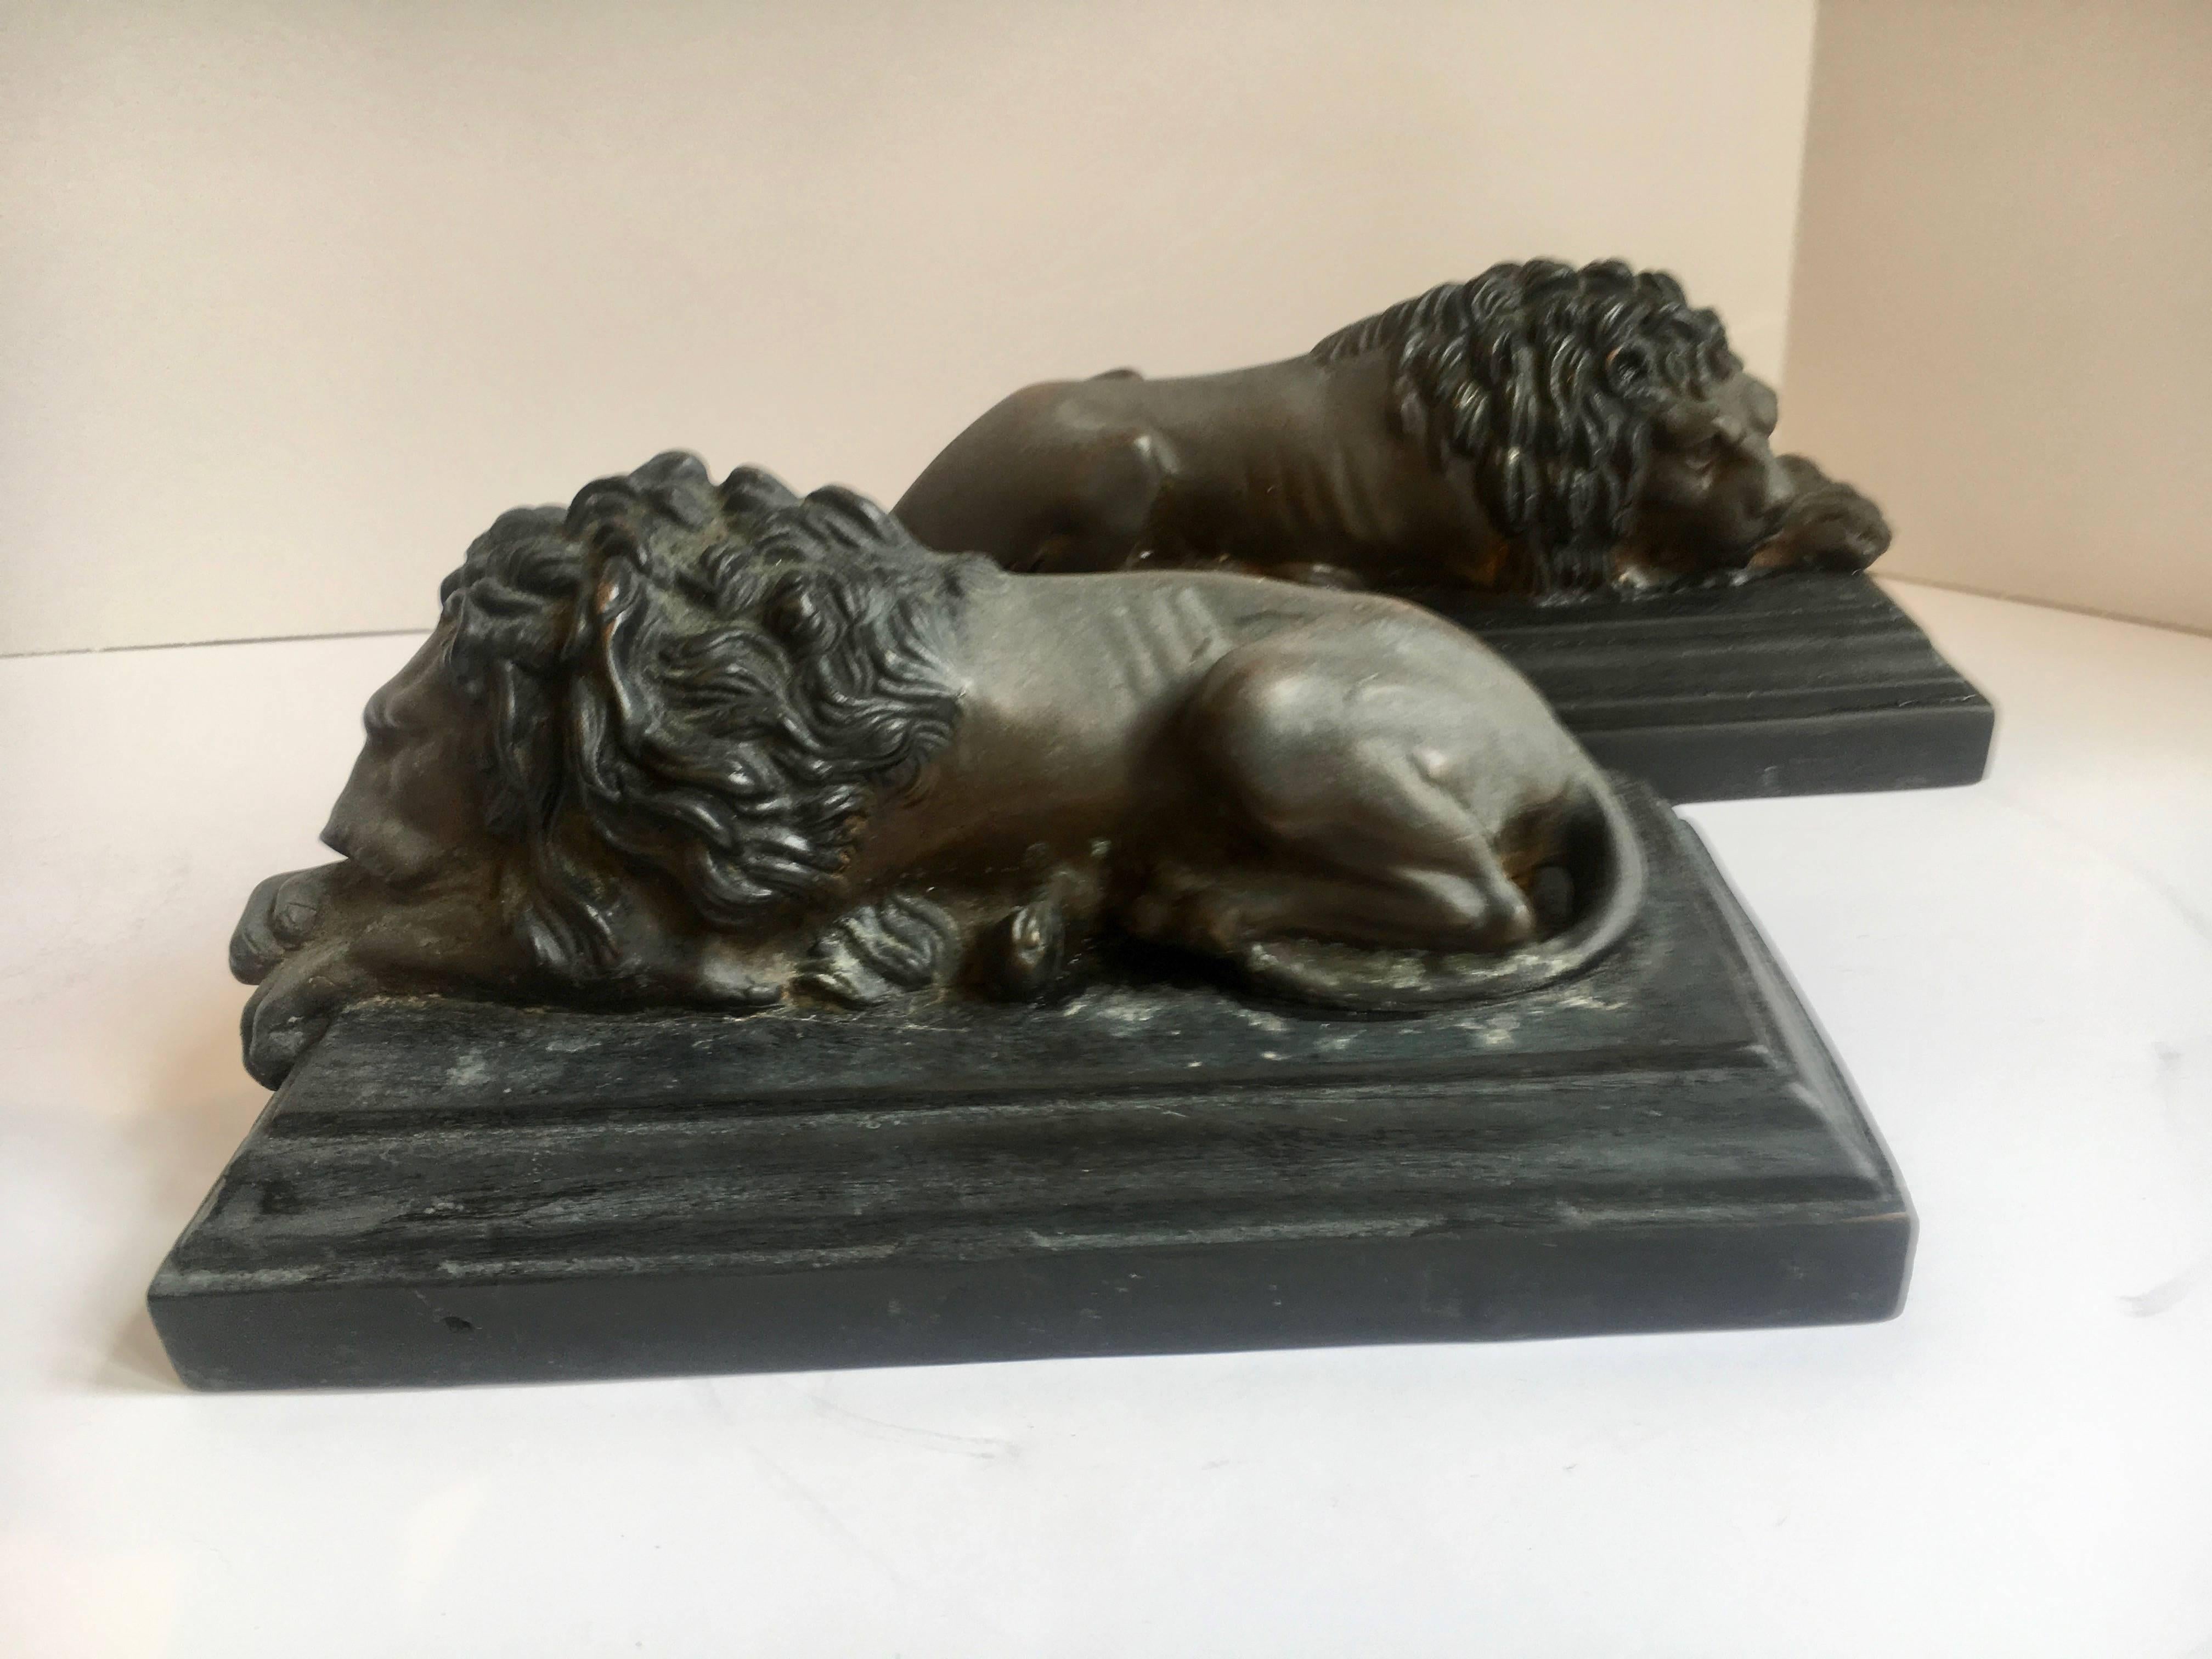 Pair of Bronze Recumbent Lion Sculpture Bookends- The pair, on a bronze base with a wooden bottom insert, can easily relax on any shelf or perhaps hold a few books? - their low design may not make them the best bookend, but you are the librarian.